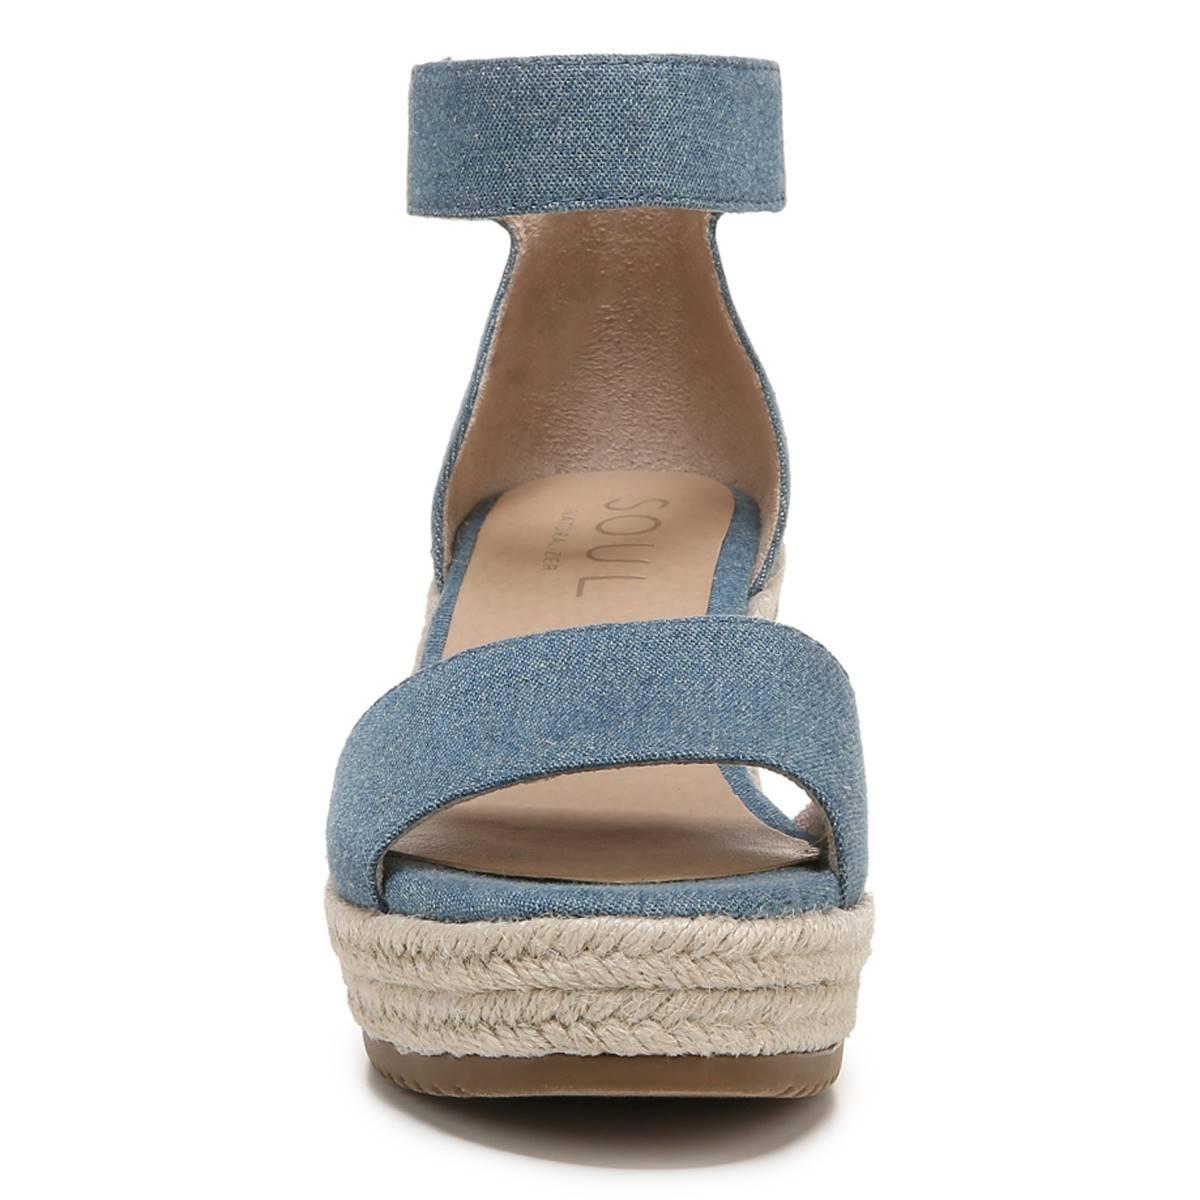 SOUL Naturalizer Oakley Womens Wedge Sandals Blue Product Image